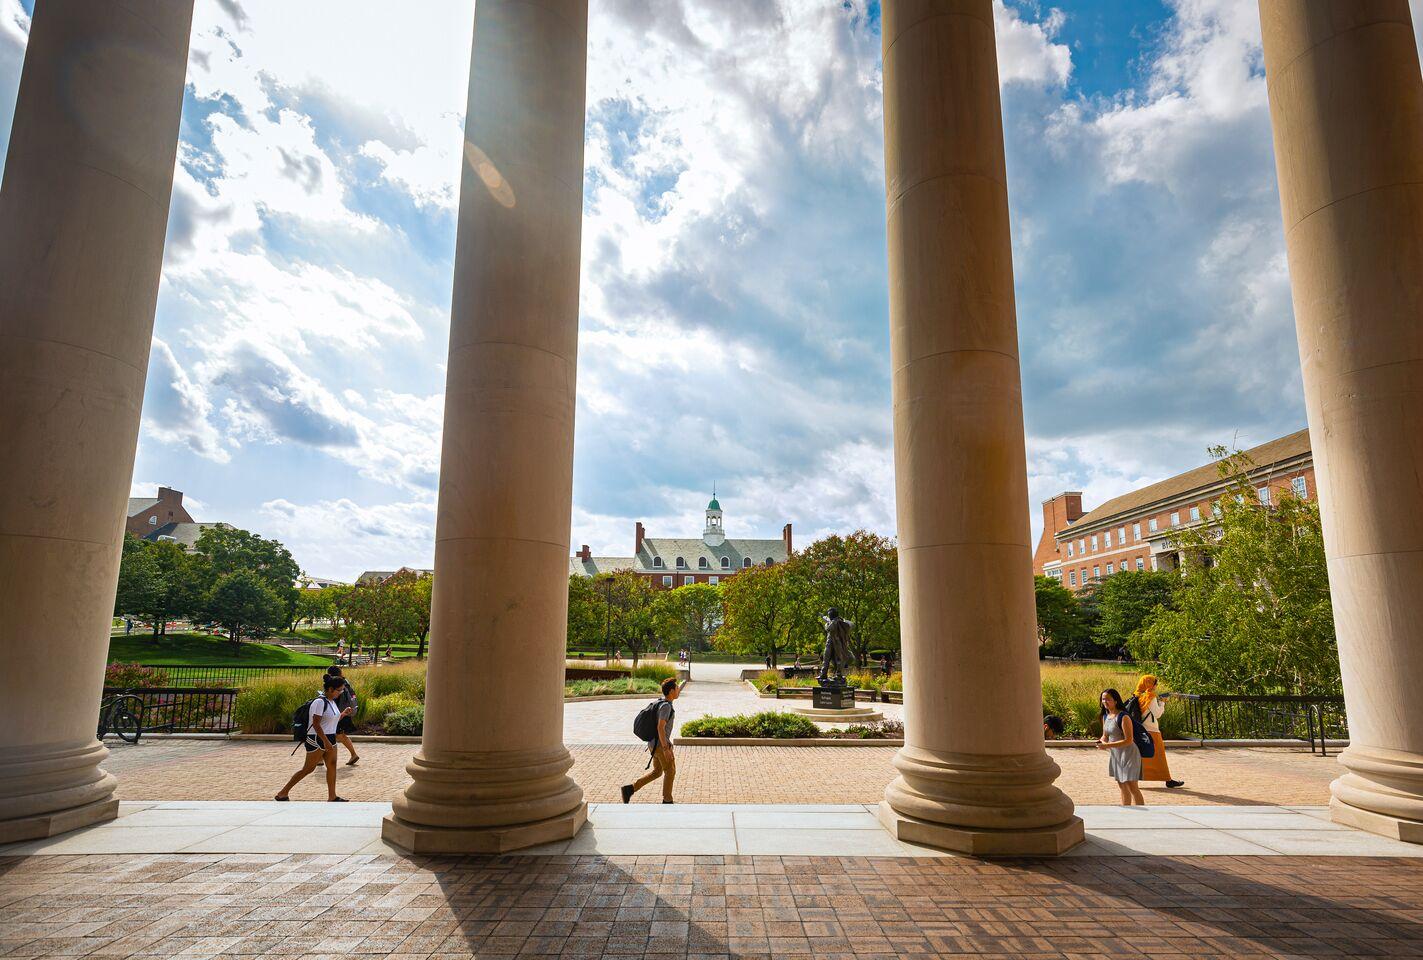 View of Frederick Douglass Square and Hornbake Plaza from under the porch and columns of Hornbake Library.